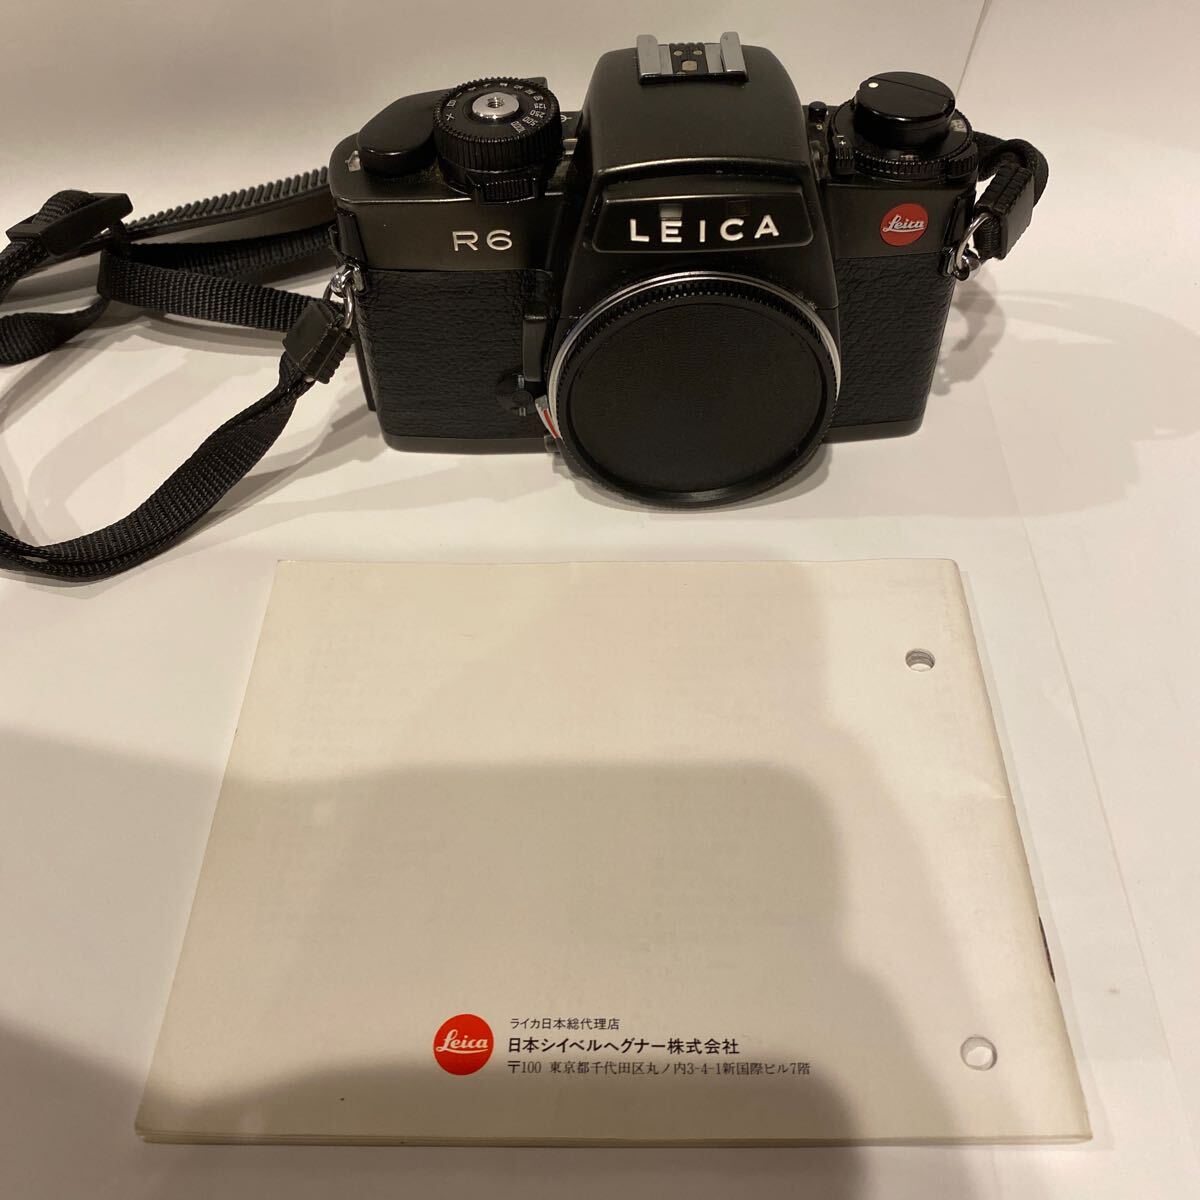  Leica R6 body use instructions attaching 